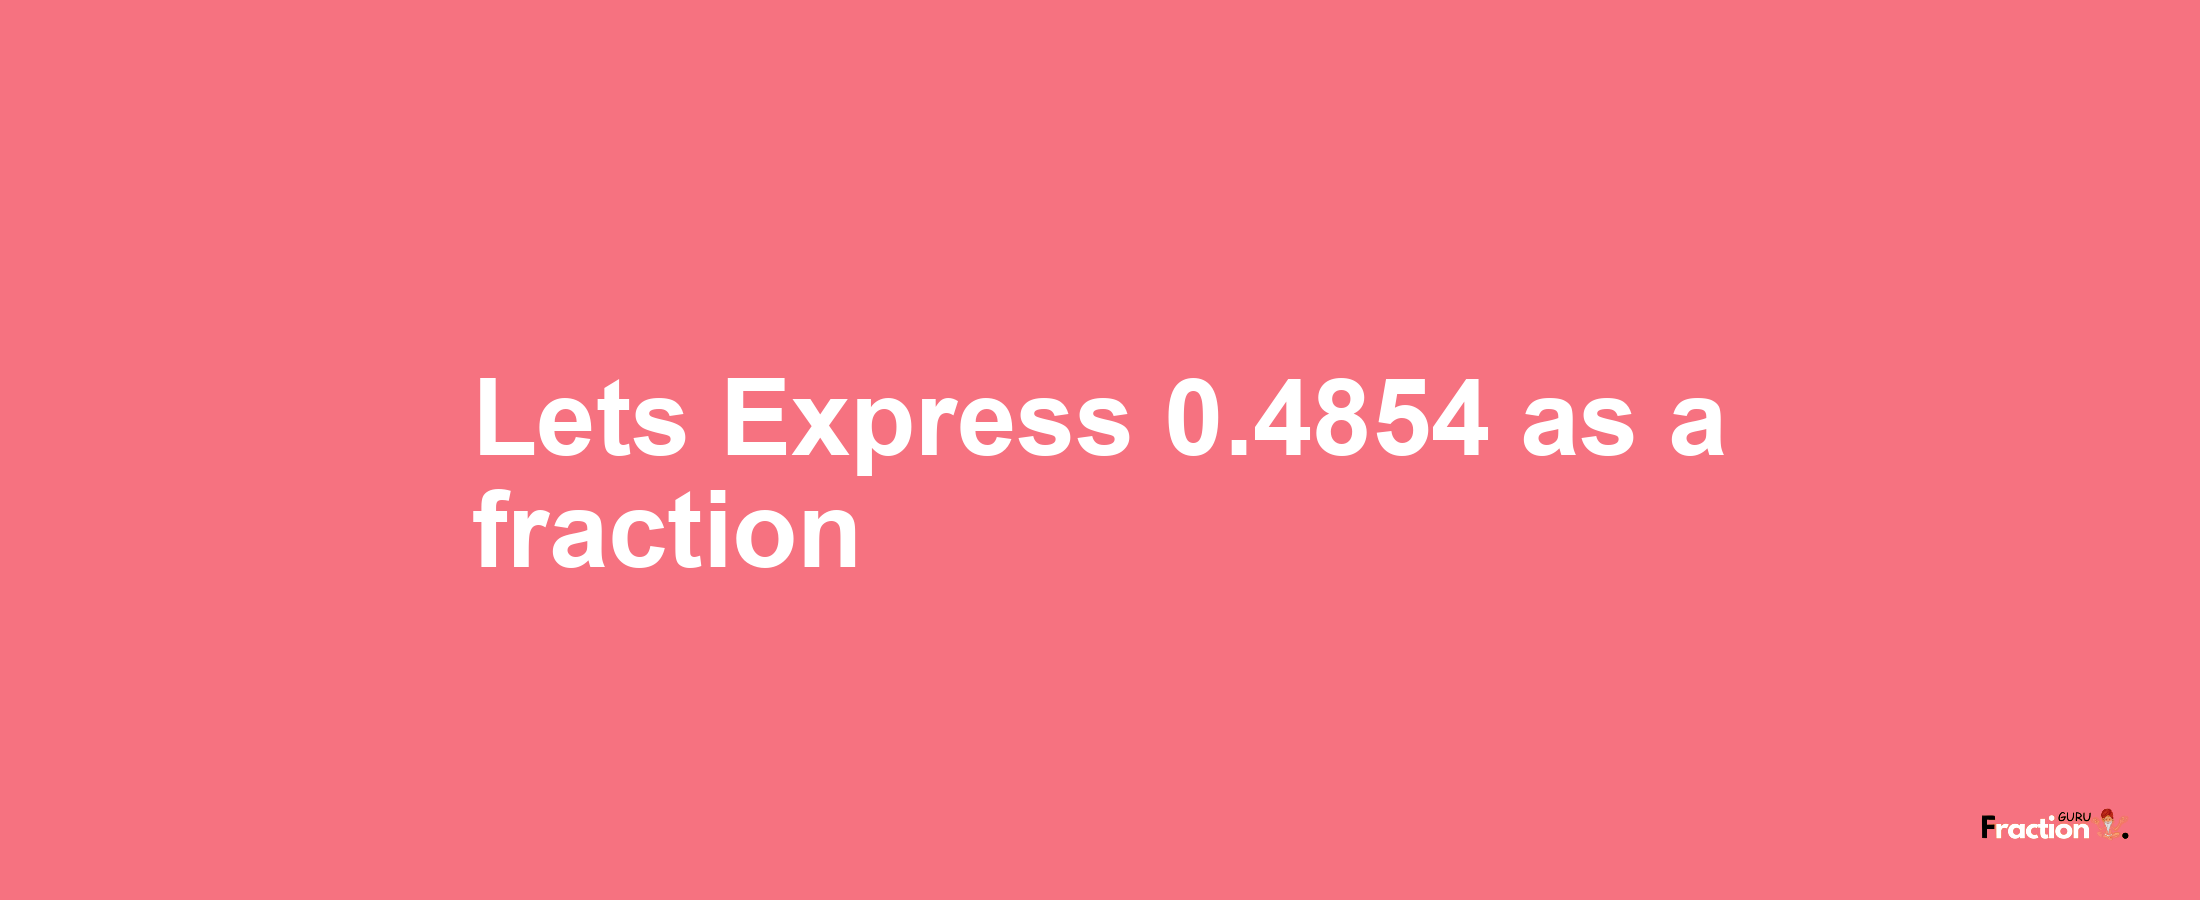 Lets Express 0.4854 as afraction